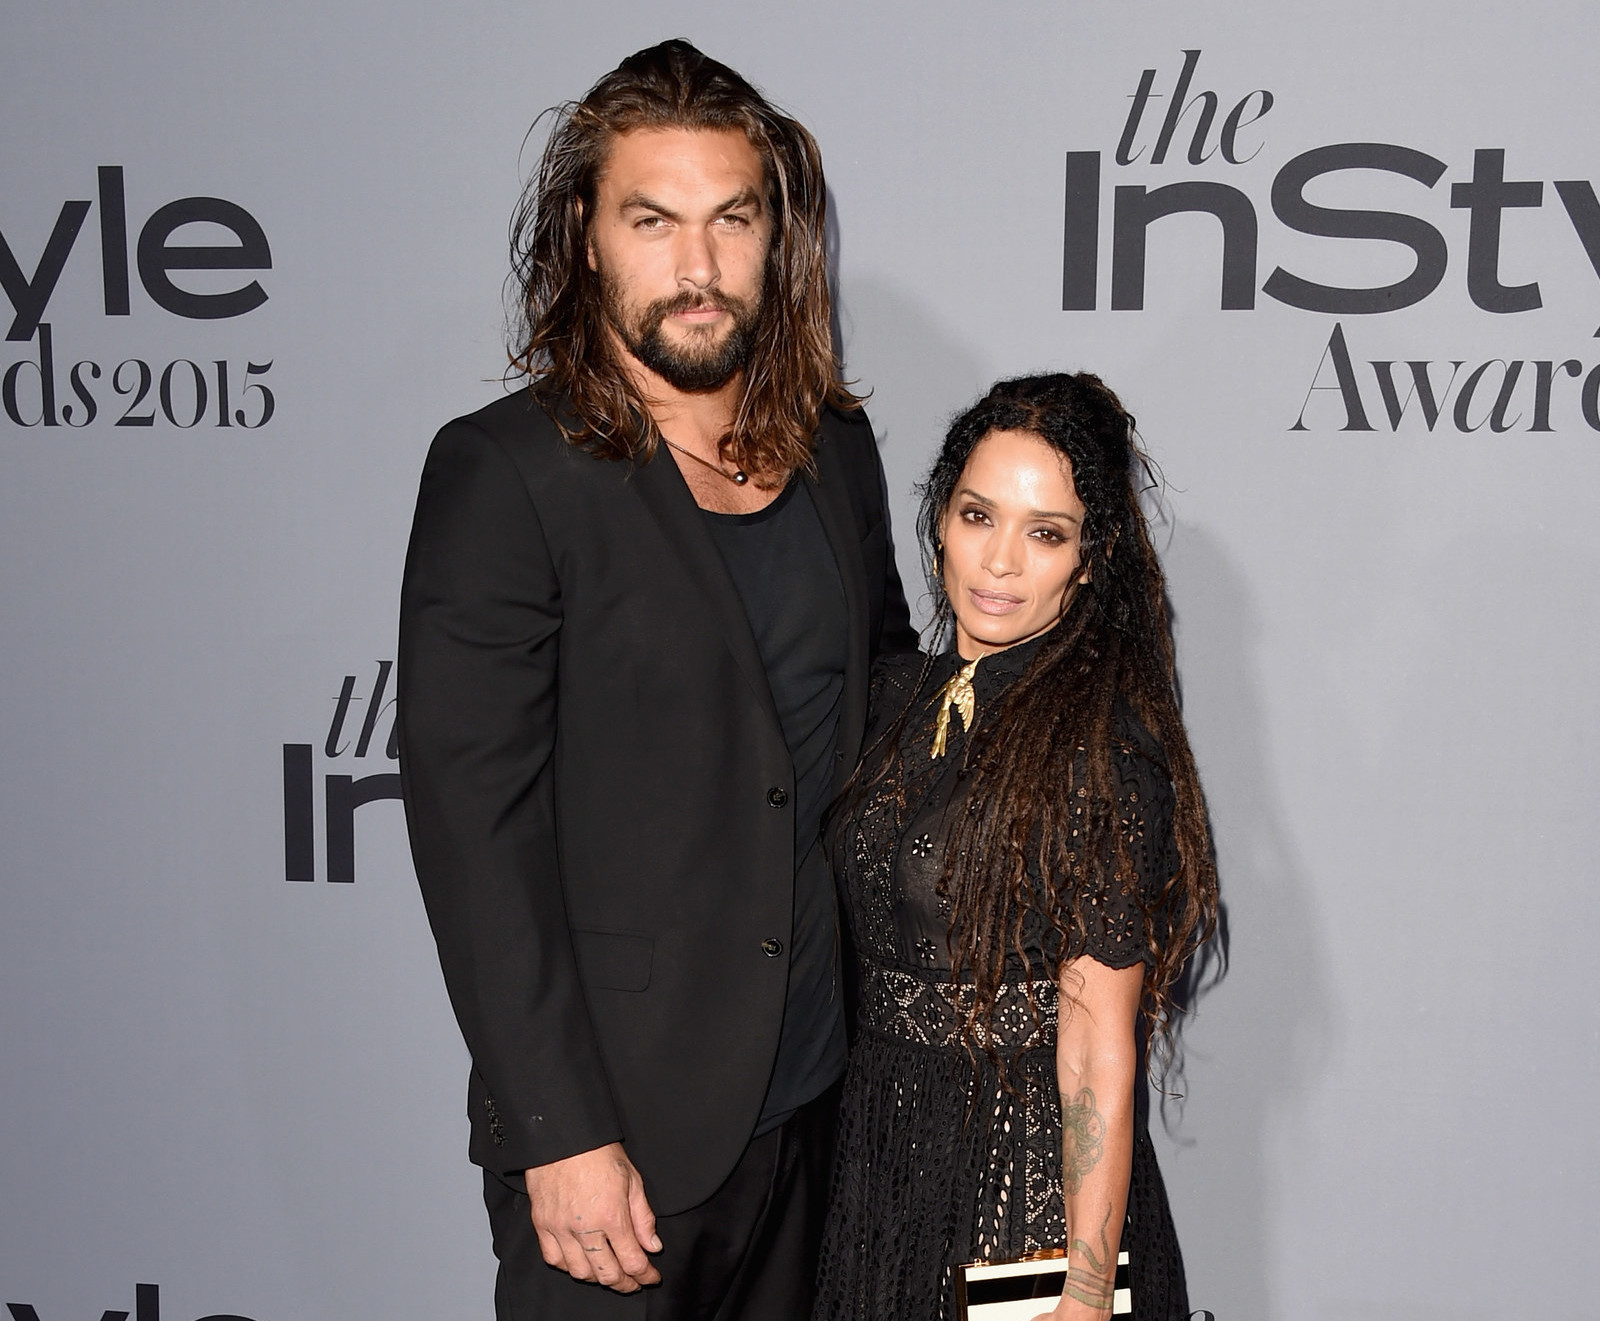 But that gap quickly came to a close when she met Jason Momoa in 2004 at a Jazz Club. He needed a ride home and the two later bonded over Guinness and grits. - Lisa Bonet Says She Was Able To Appreciate Jason Momoa More Because Of Her Absent Father